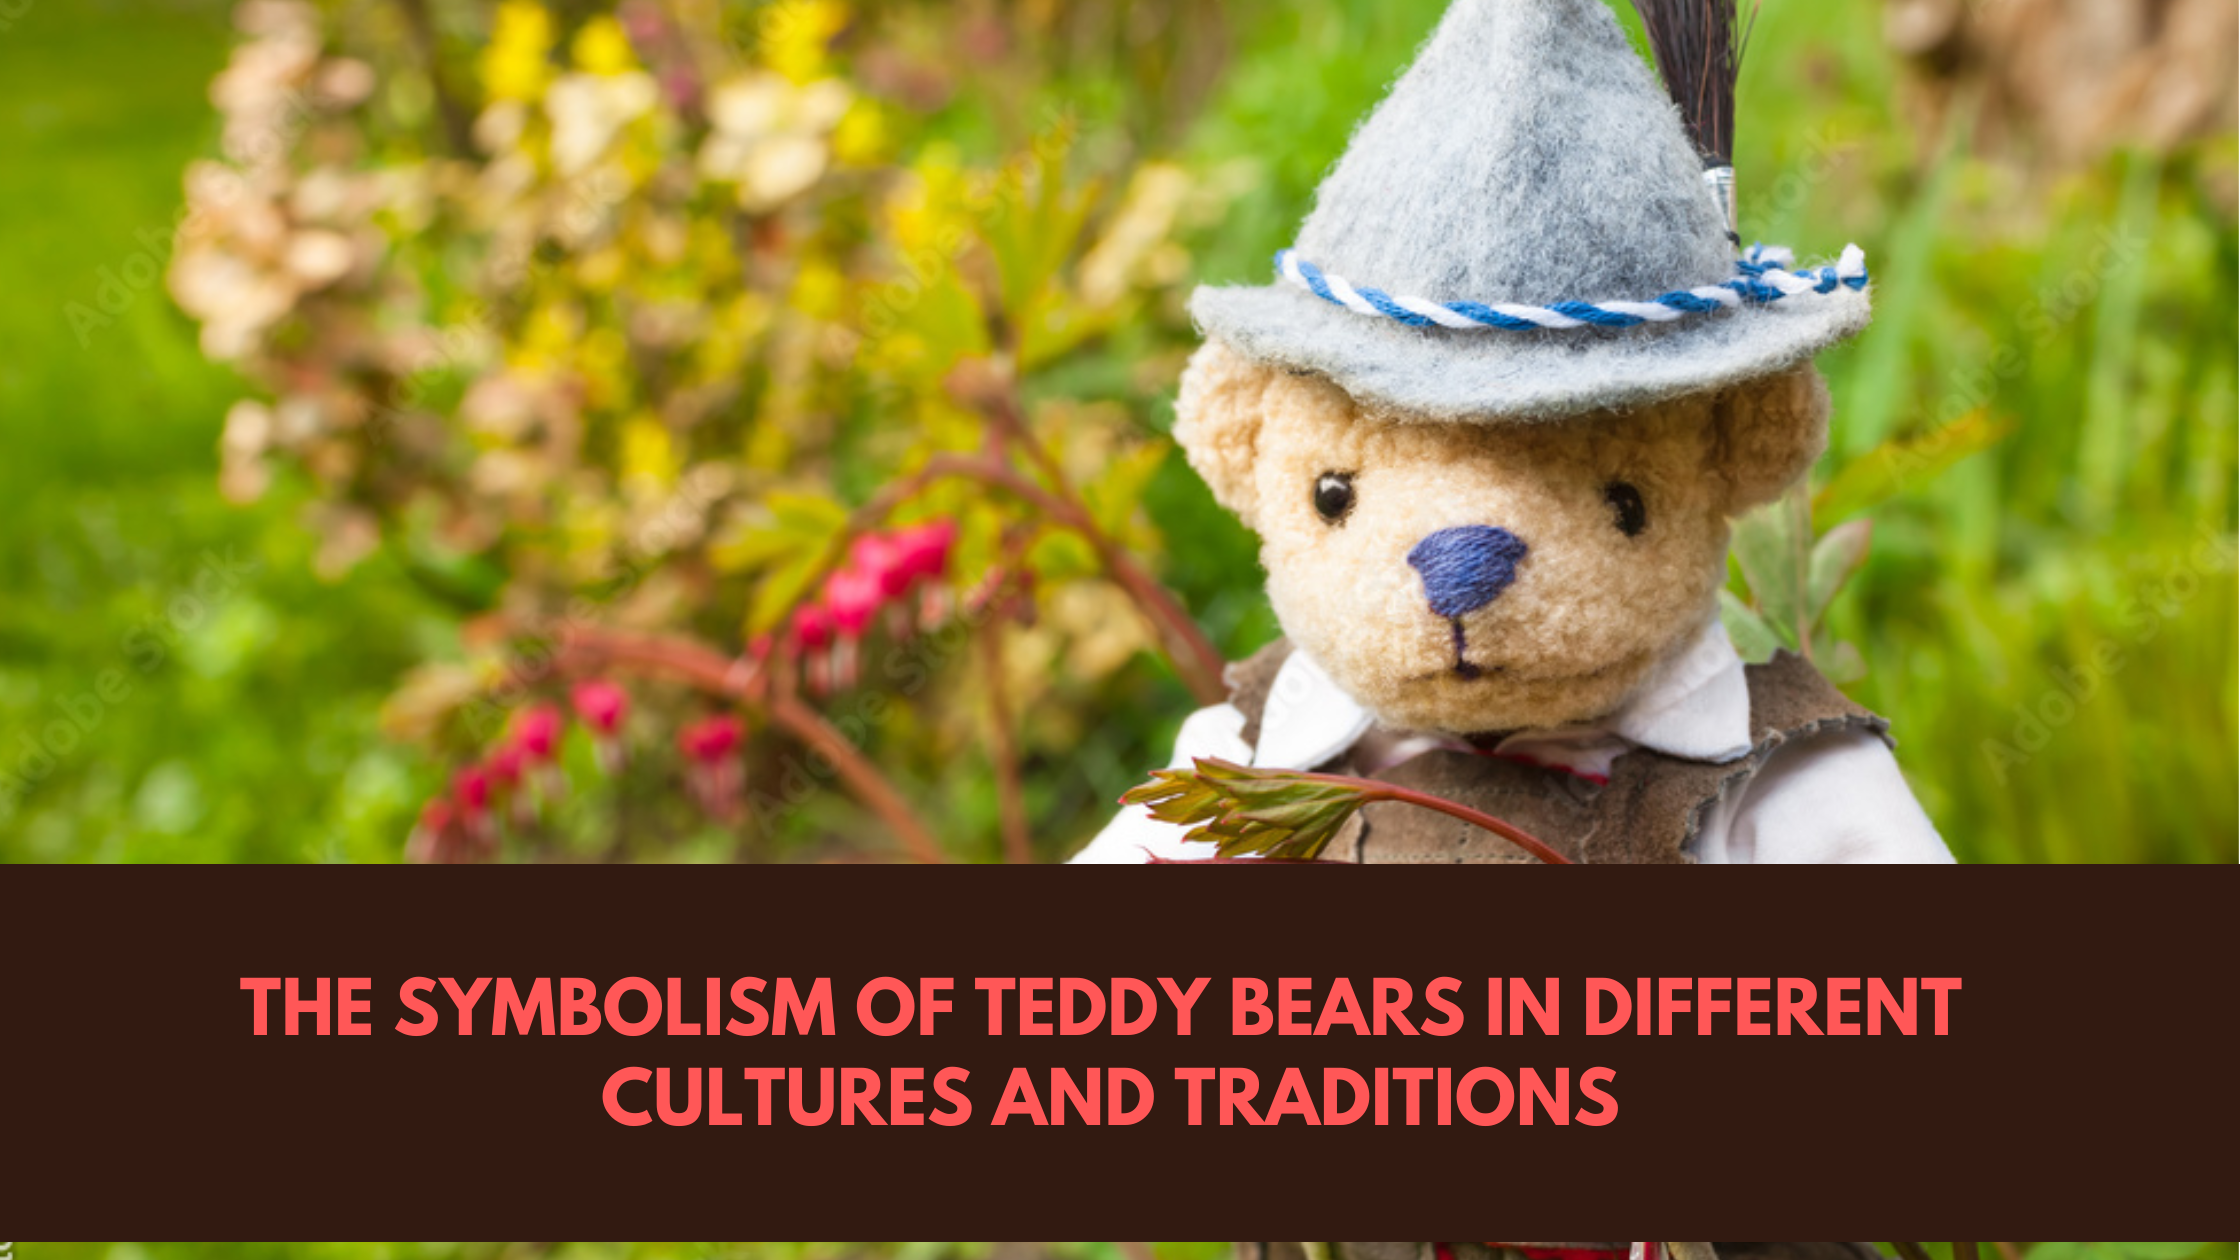 The Symbolism of Teddy Bears in Different Cultures and Traditions